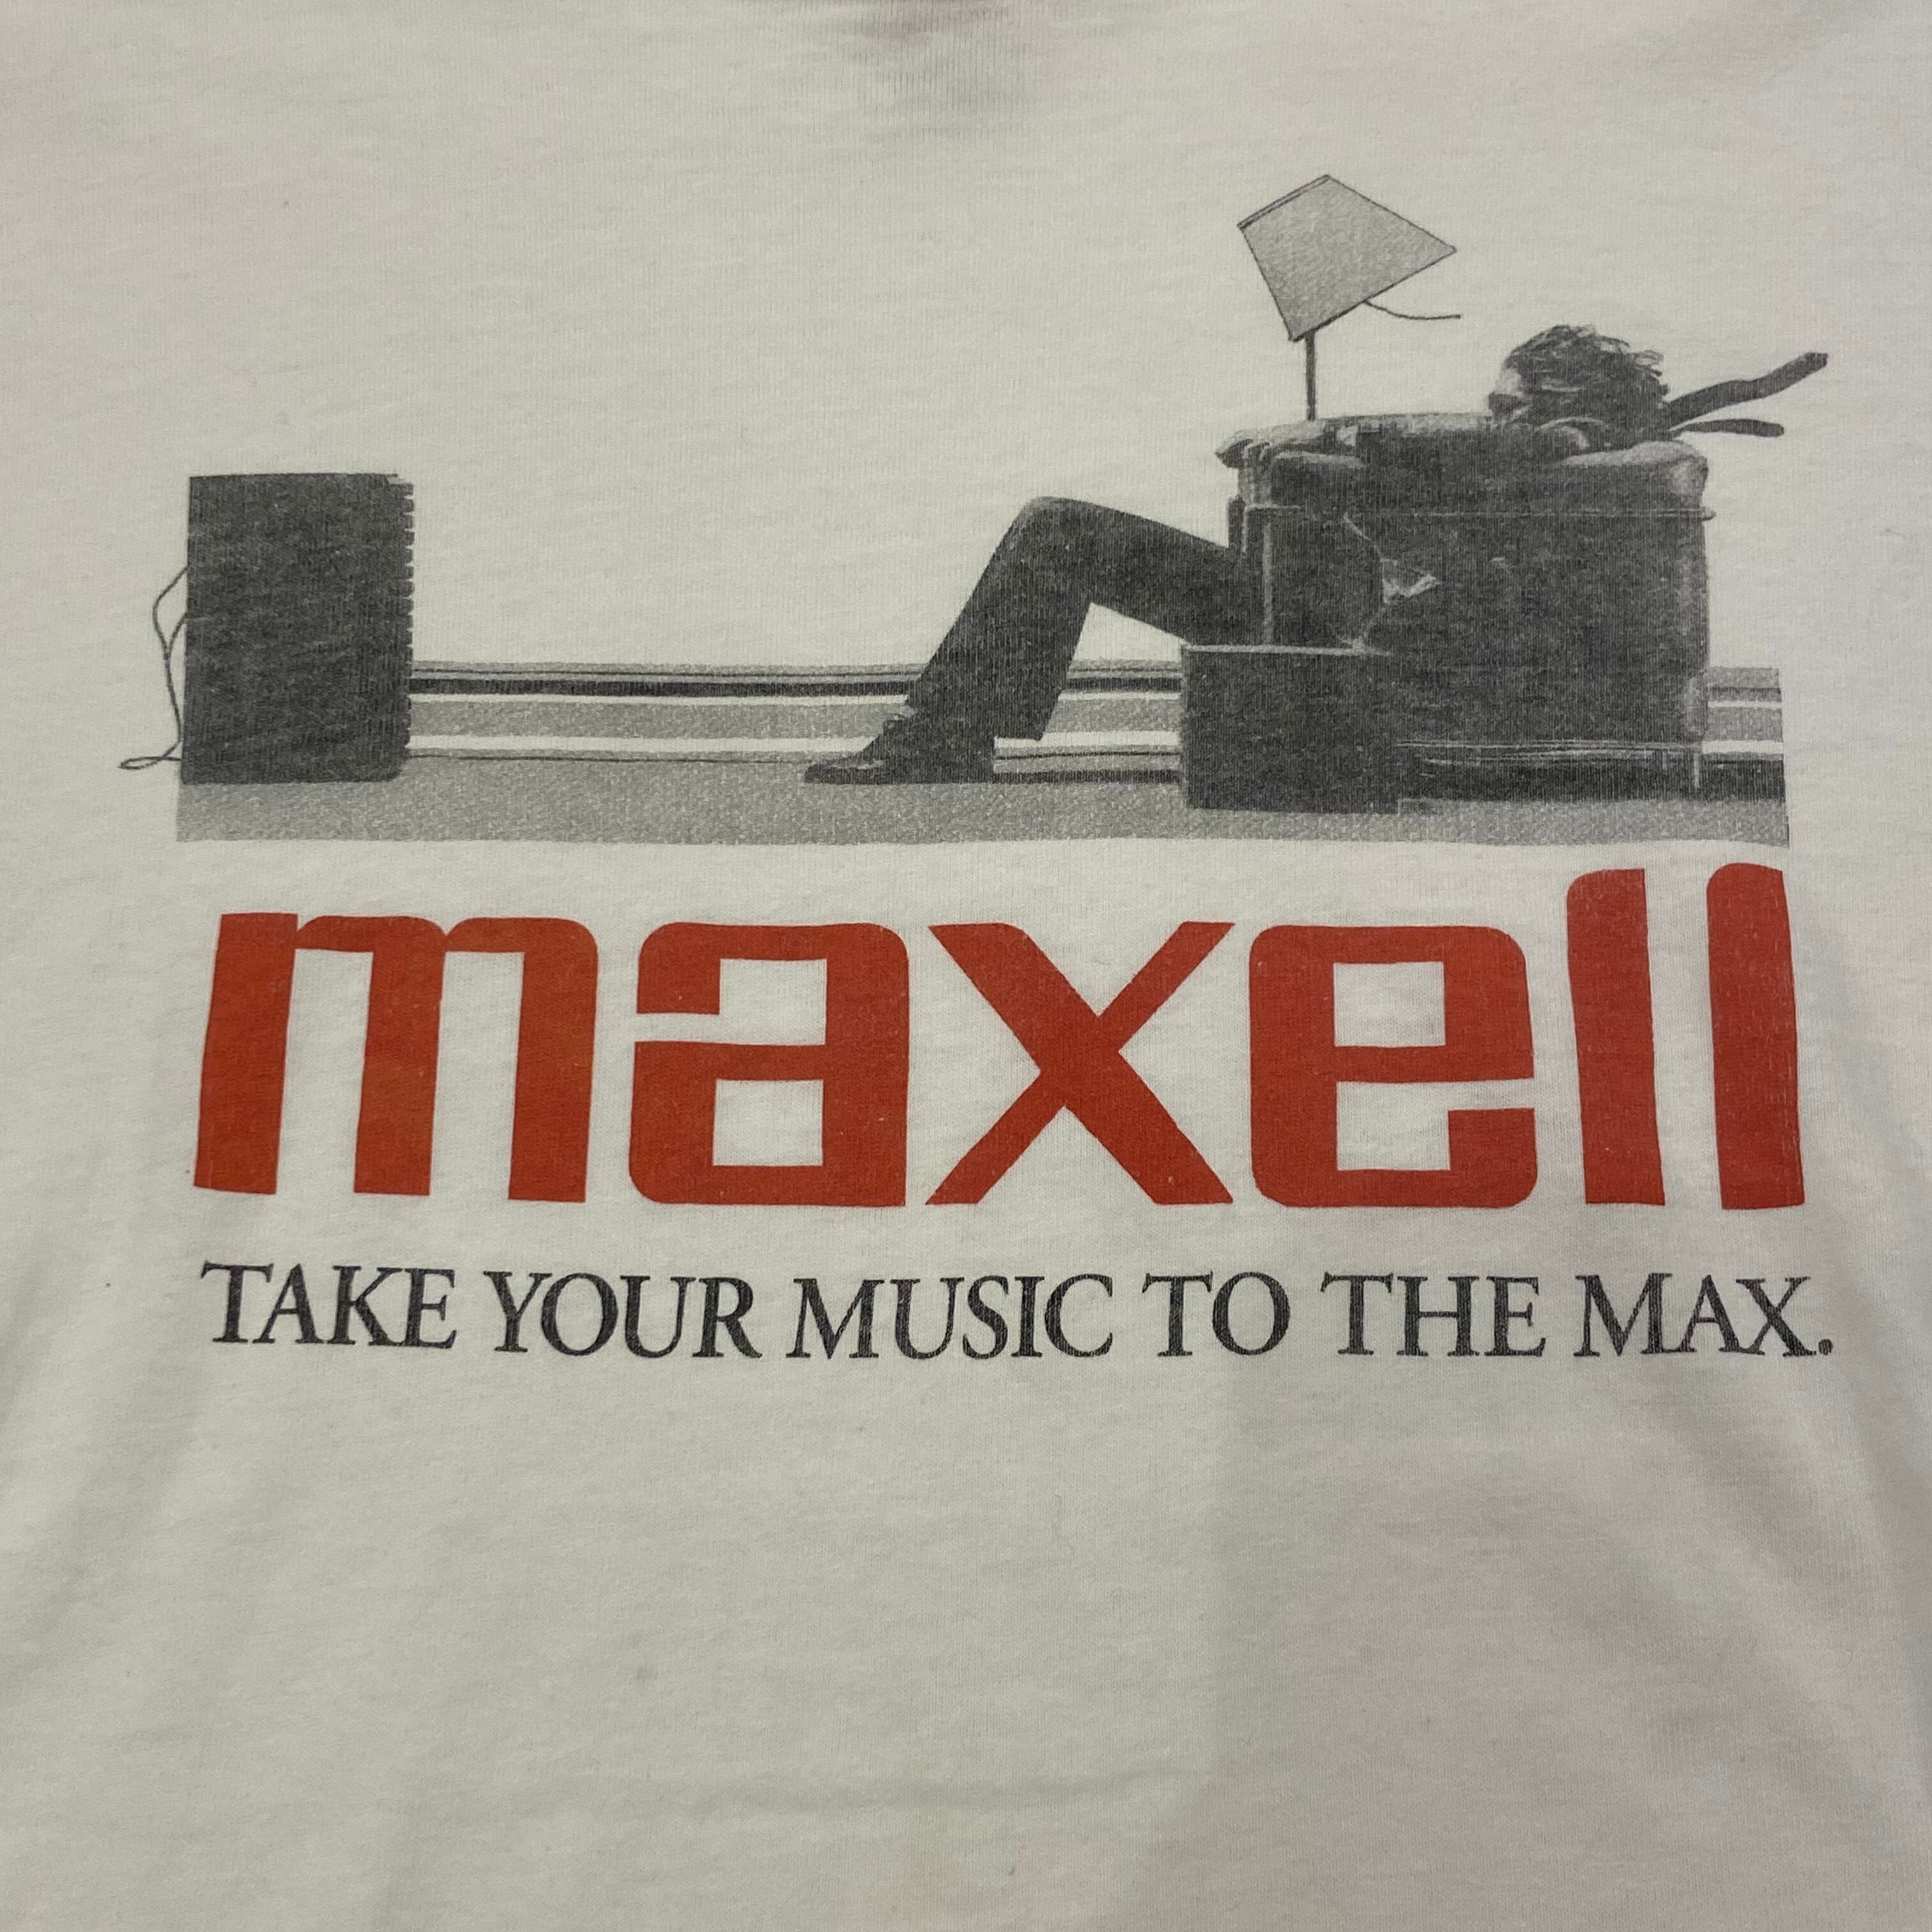 80-90'S maxell マクセル シルグルステッチ グラフィックTee